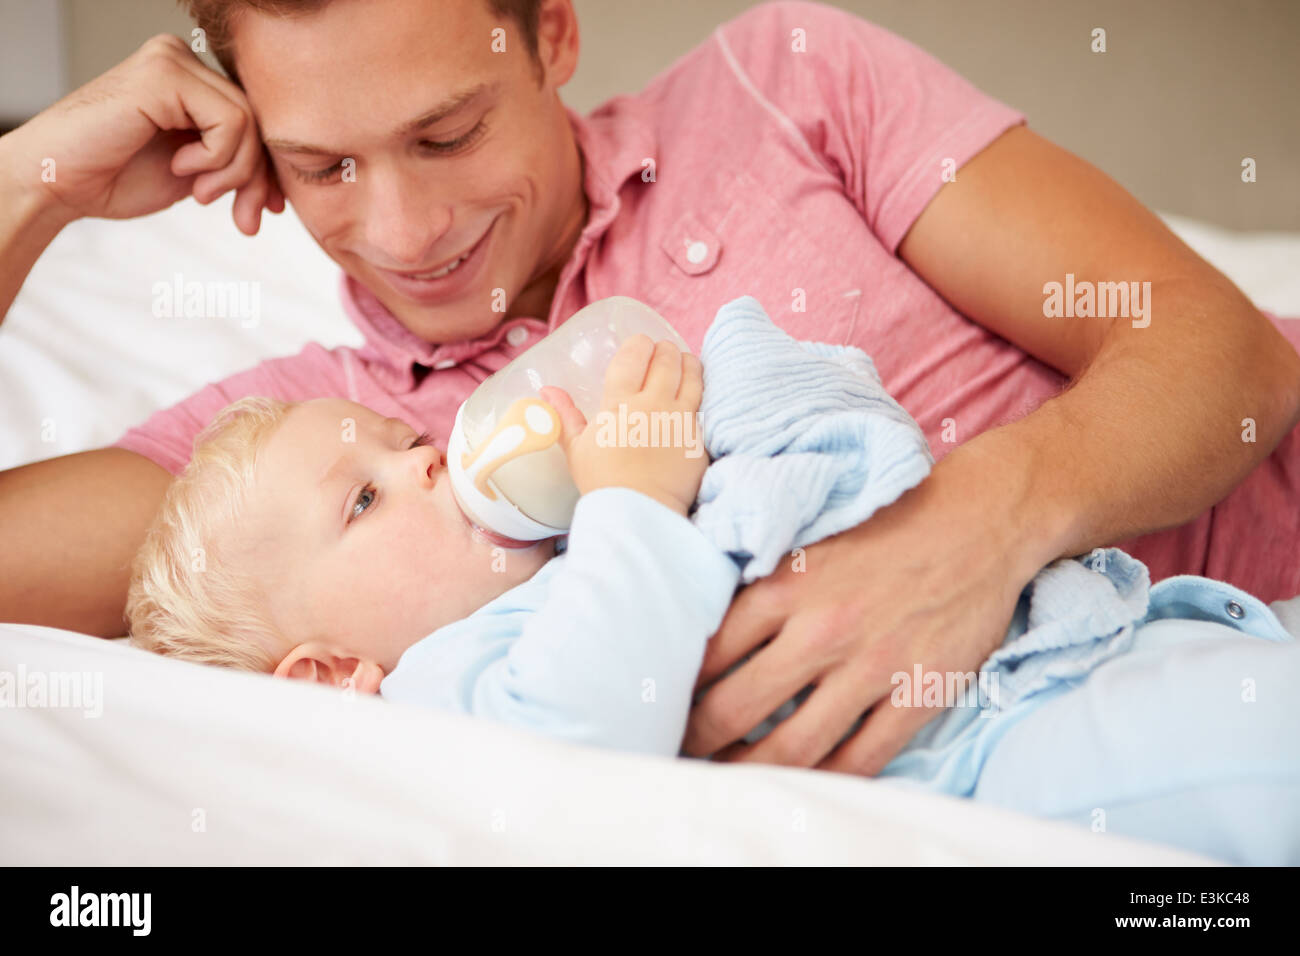 Father Giving Baby Son Bottle Of Milk Stock Photo